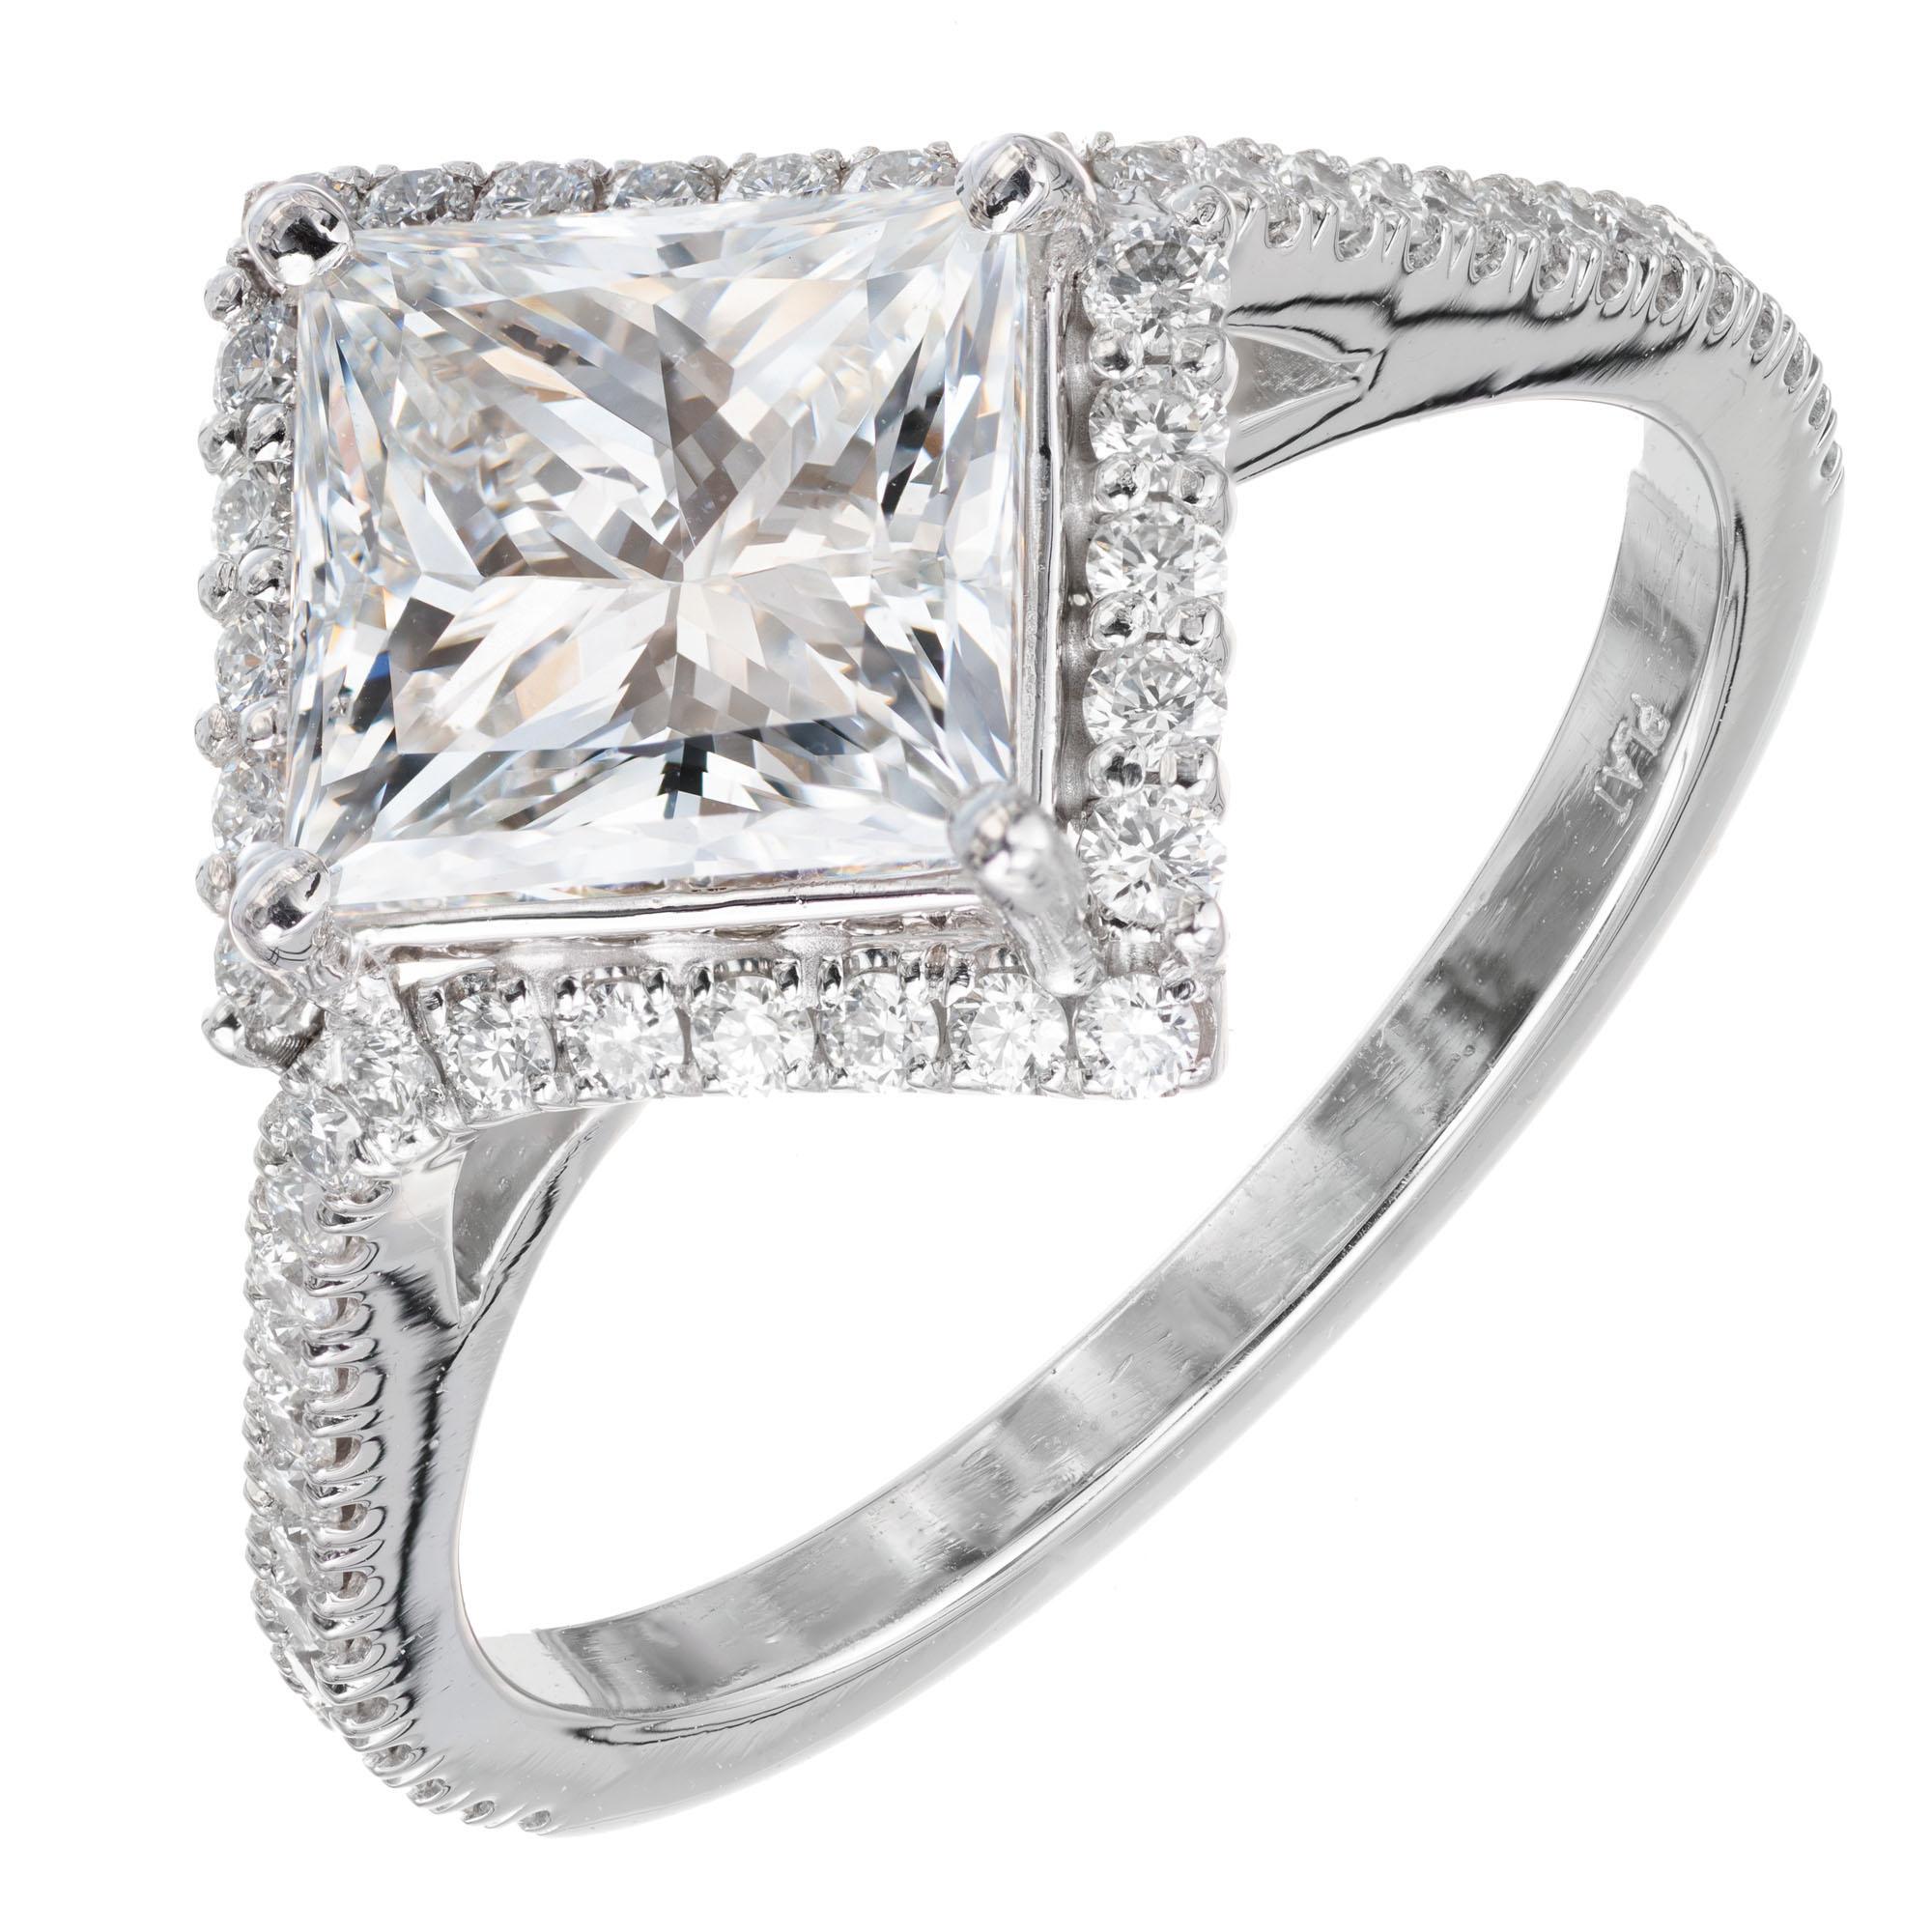 GIA Certified 1.85ct princess cut diamond center stone, with a halo of 50 round brilliant accent diamonds, in a platinum setting. Made in the Peter Suchy Workshop  

1 square modified brilliant diamond F VS2, approx.  1.95cts GIA Certificate